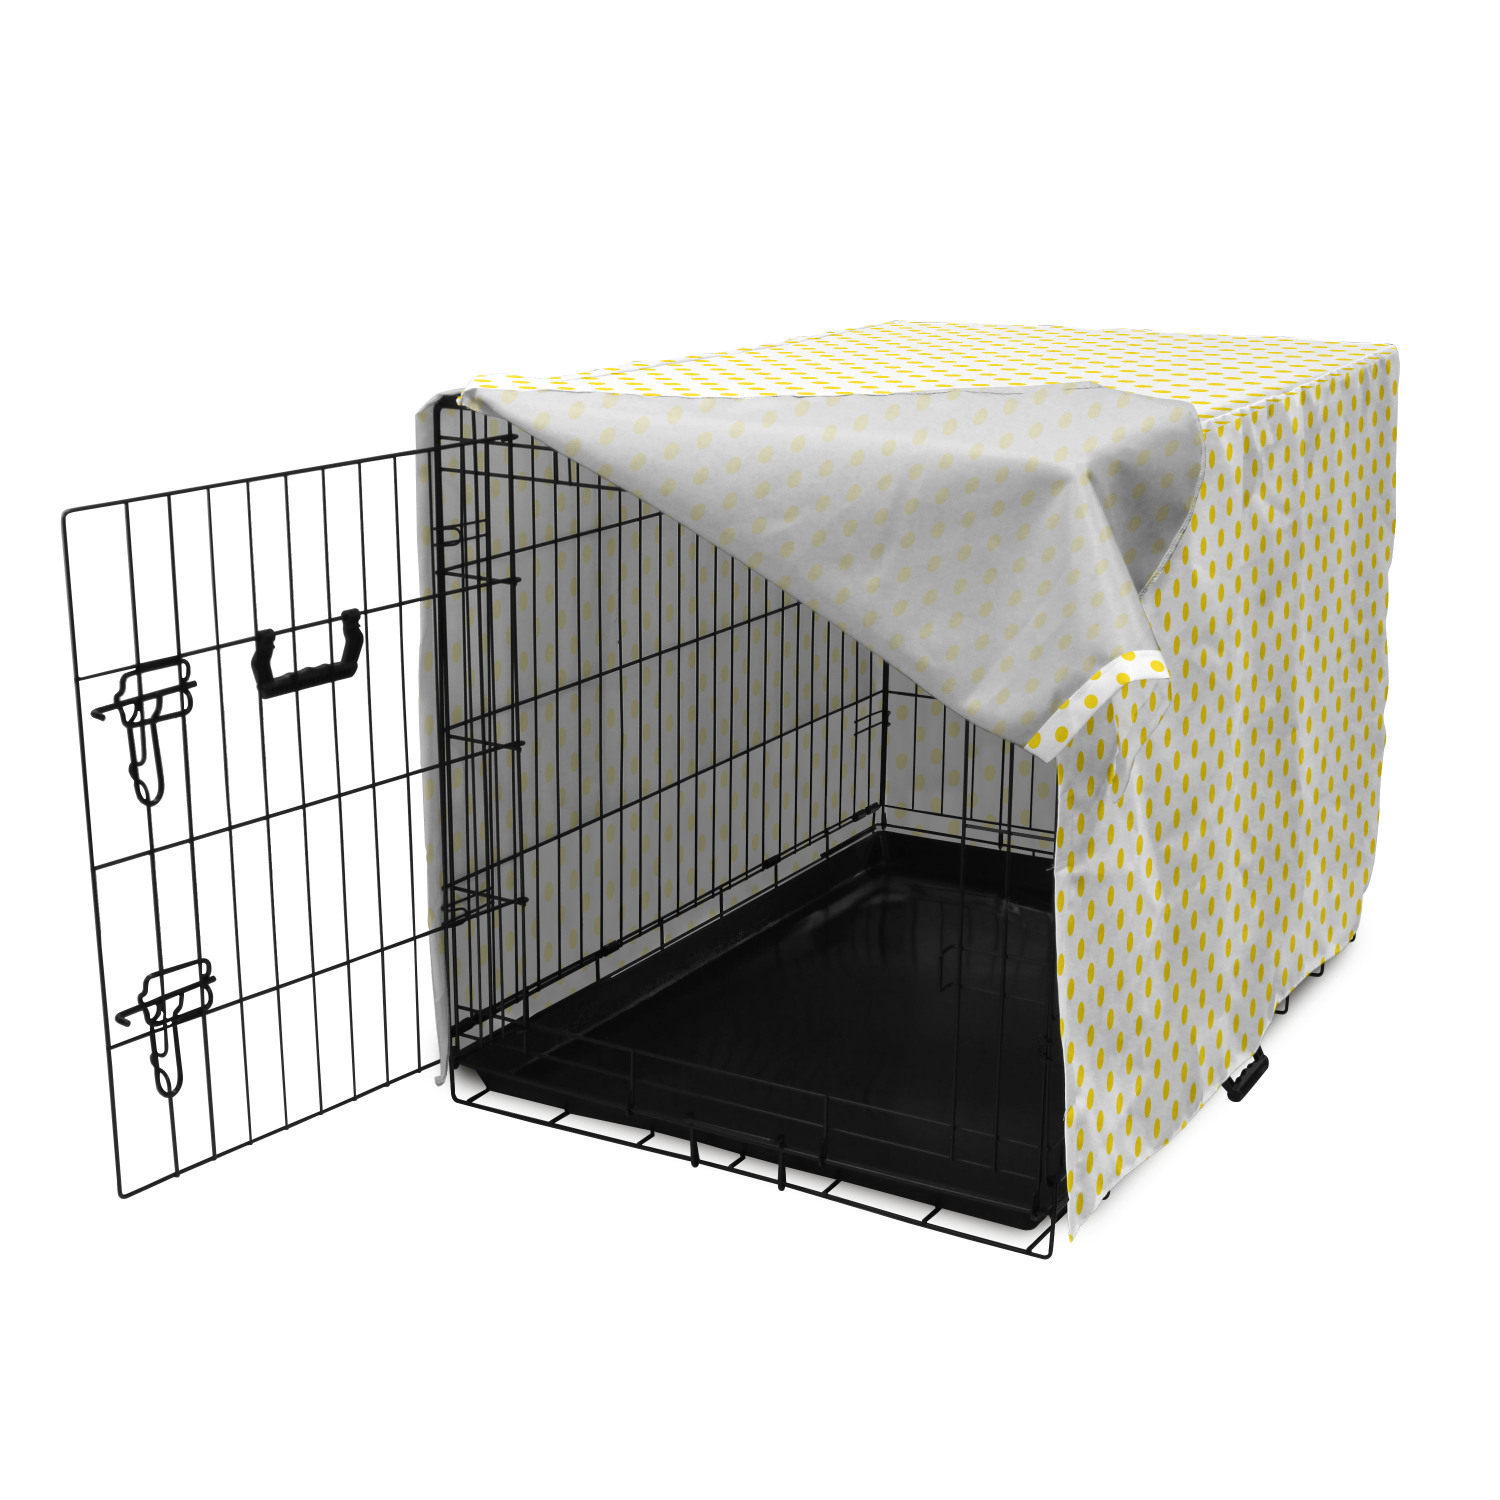 Yellow Dog Crate Cover, Picnic Like 50s 60s 70s Retro Themed Yellow Spotted White Pattern Print, Easy to Use Pet Kennel Cover for Medium Large Dogs, 35" x 23" x 27", Yellow and White, by Ambesonne - image 3 of 6